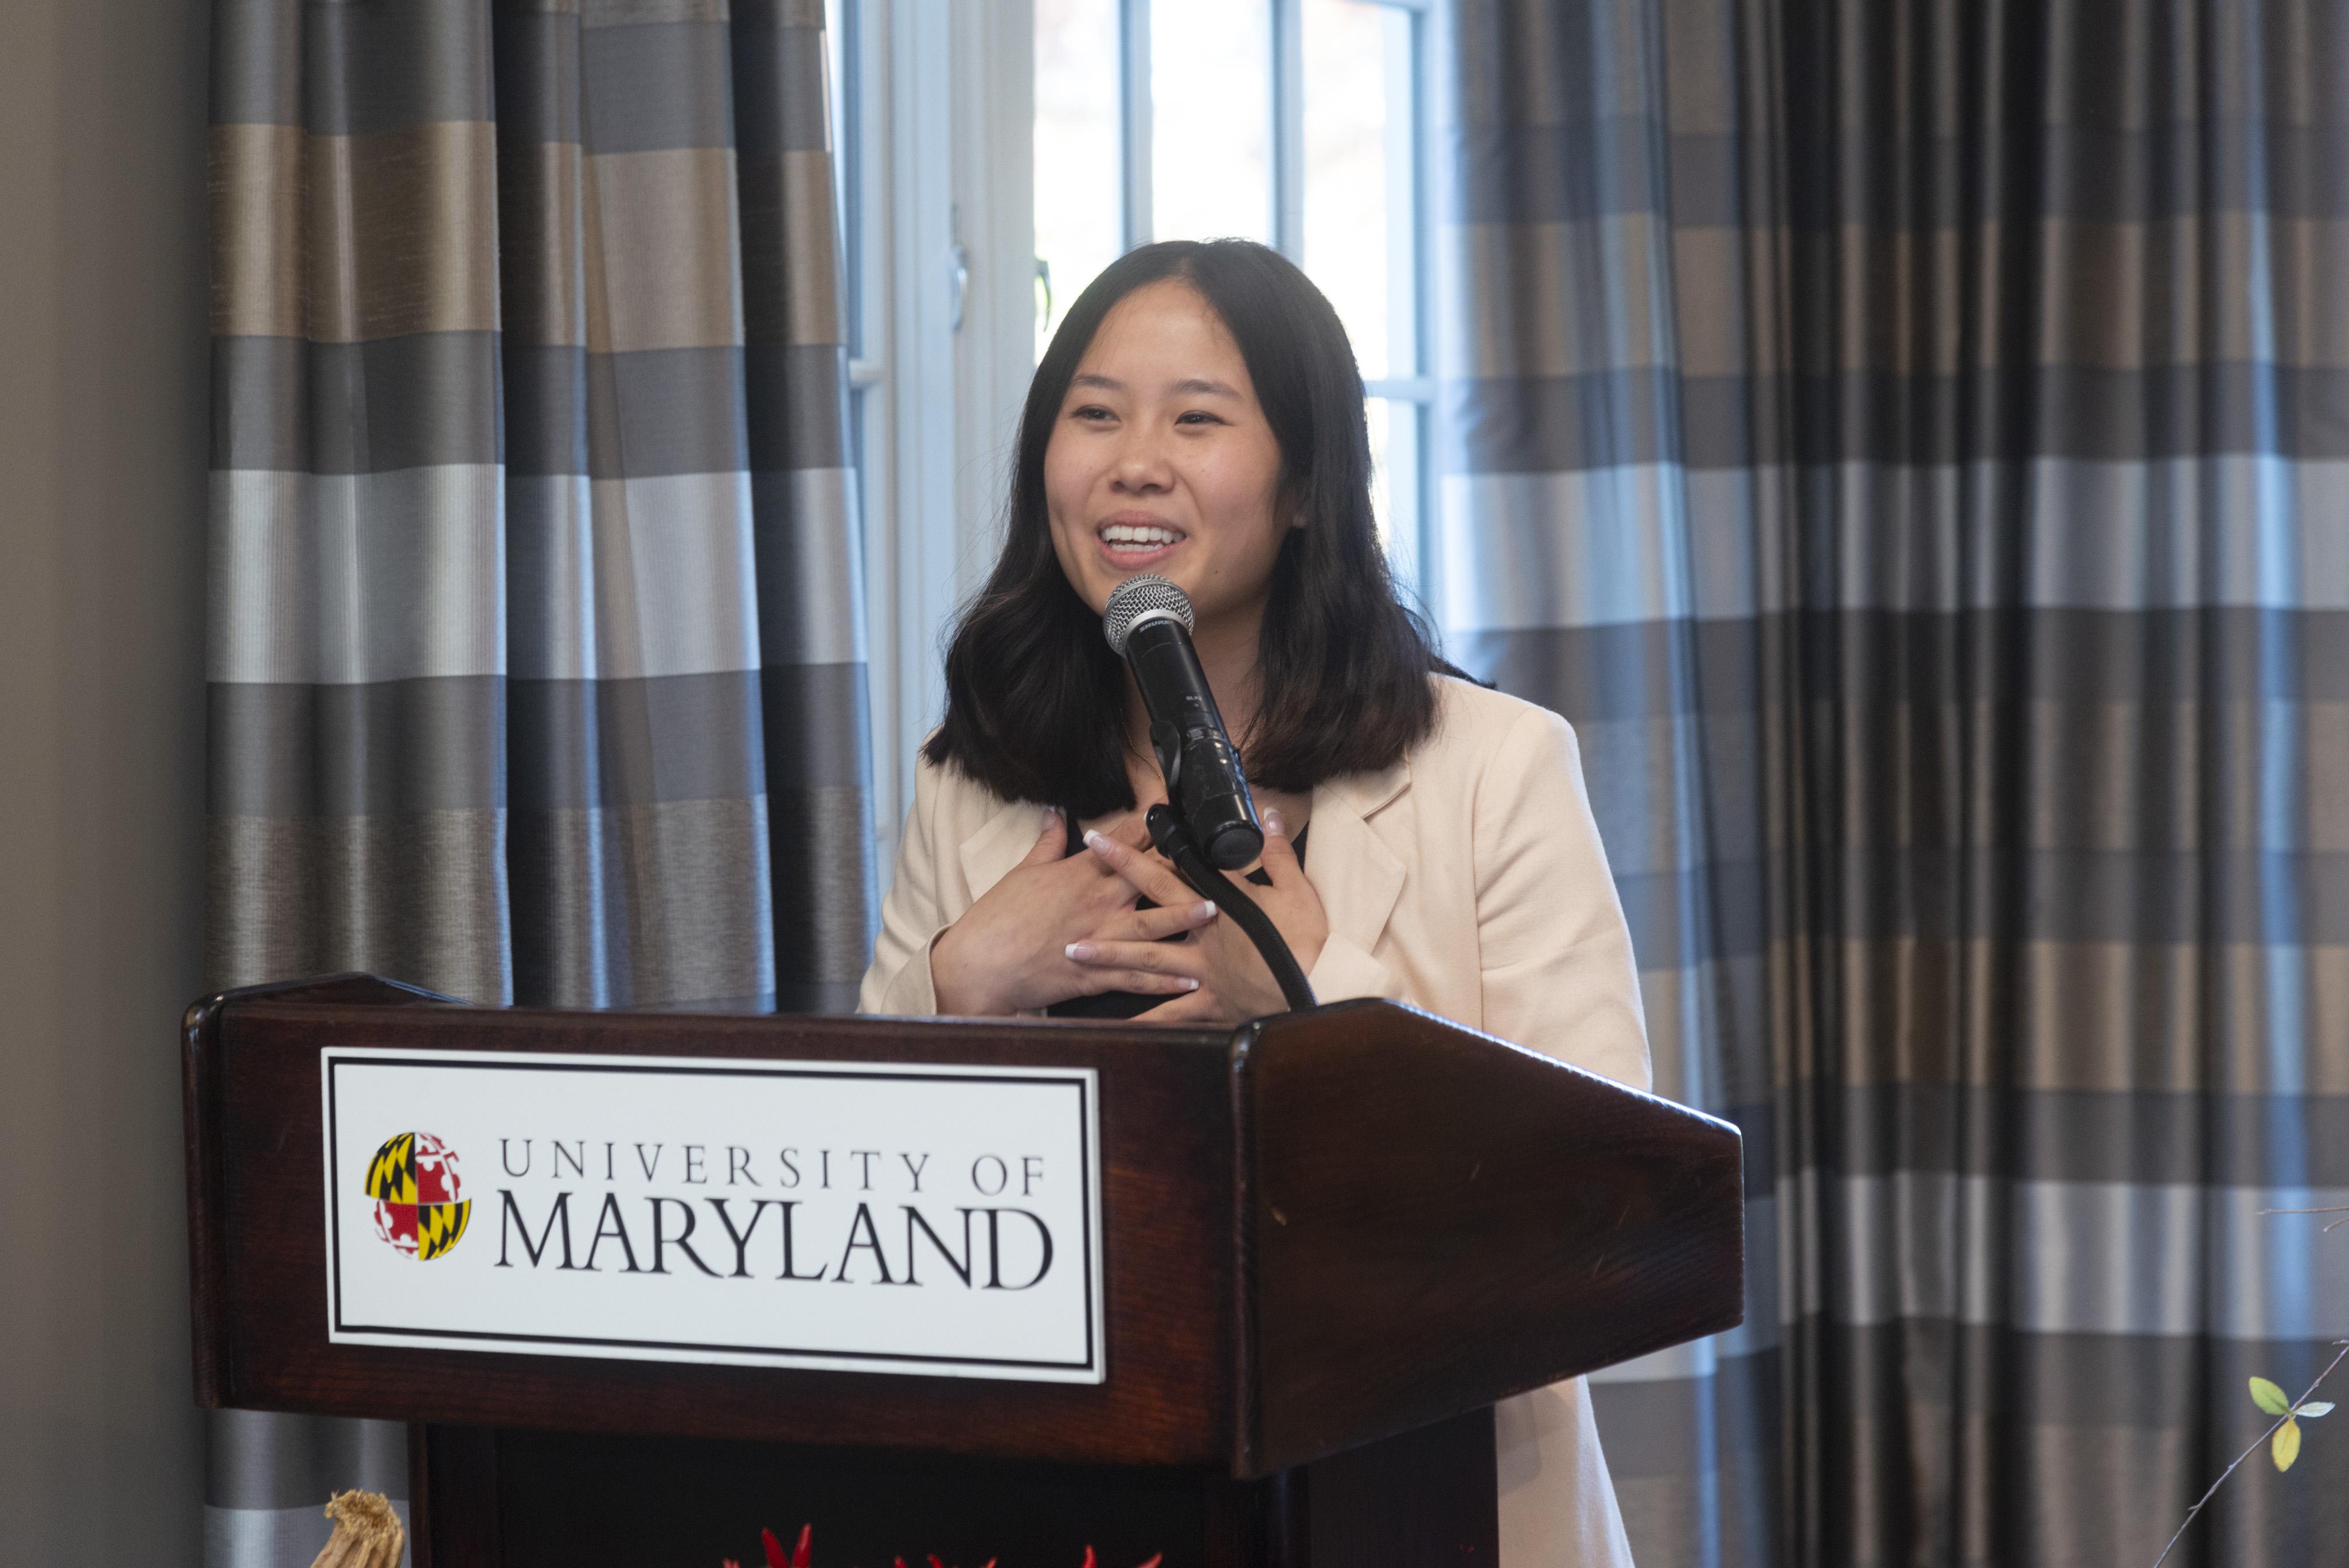 Katelyn Wang, wearing cream blazer and black shirt, speaks behind a podium with the University of Maryland name on it.